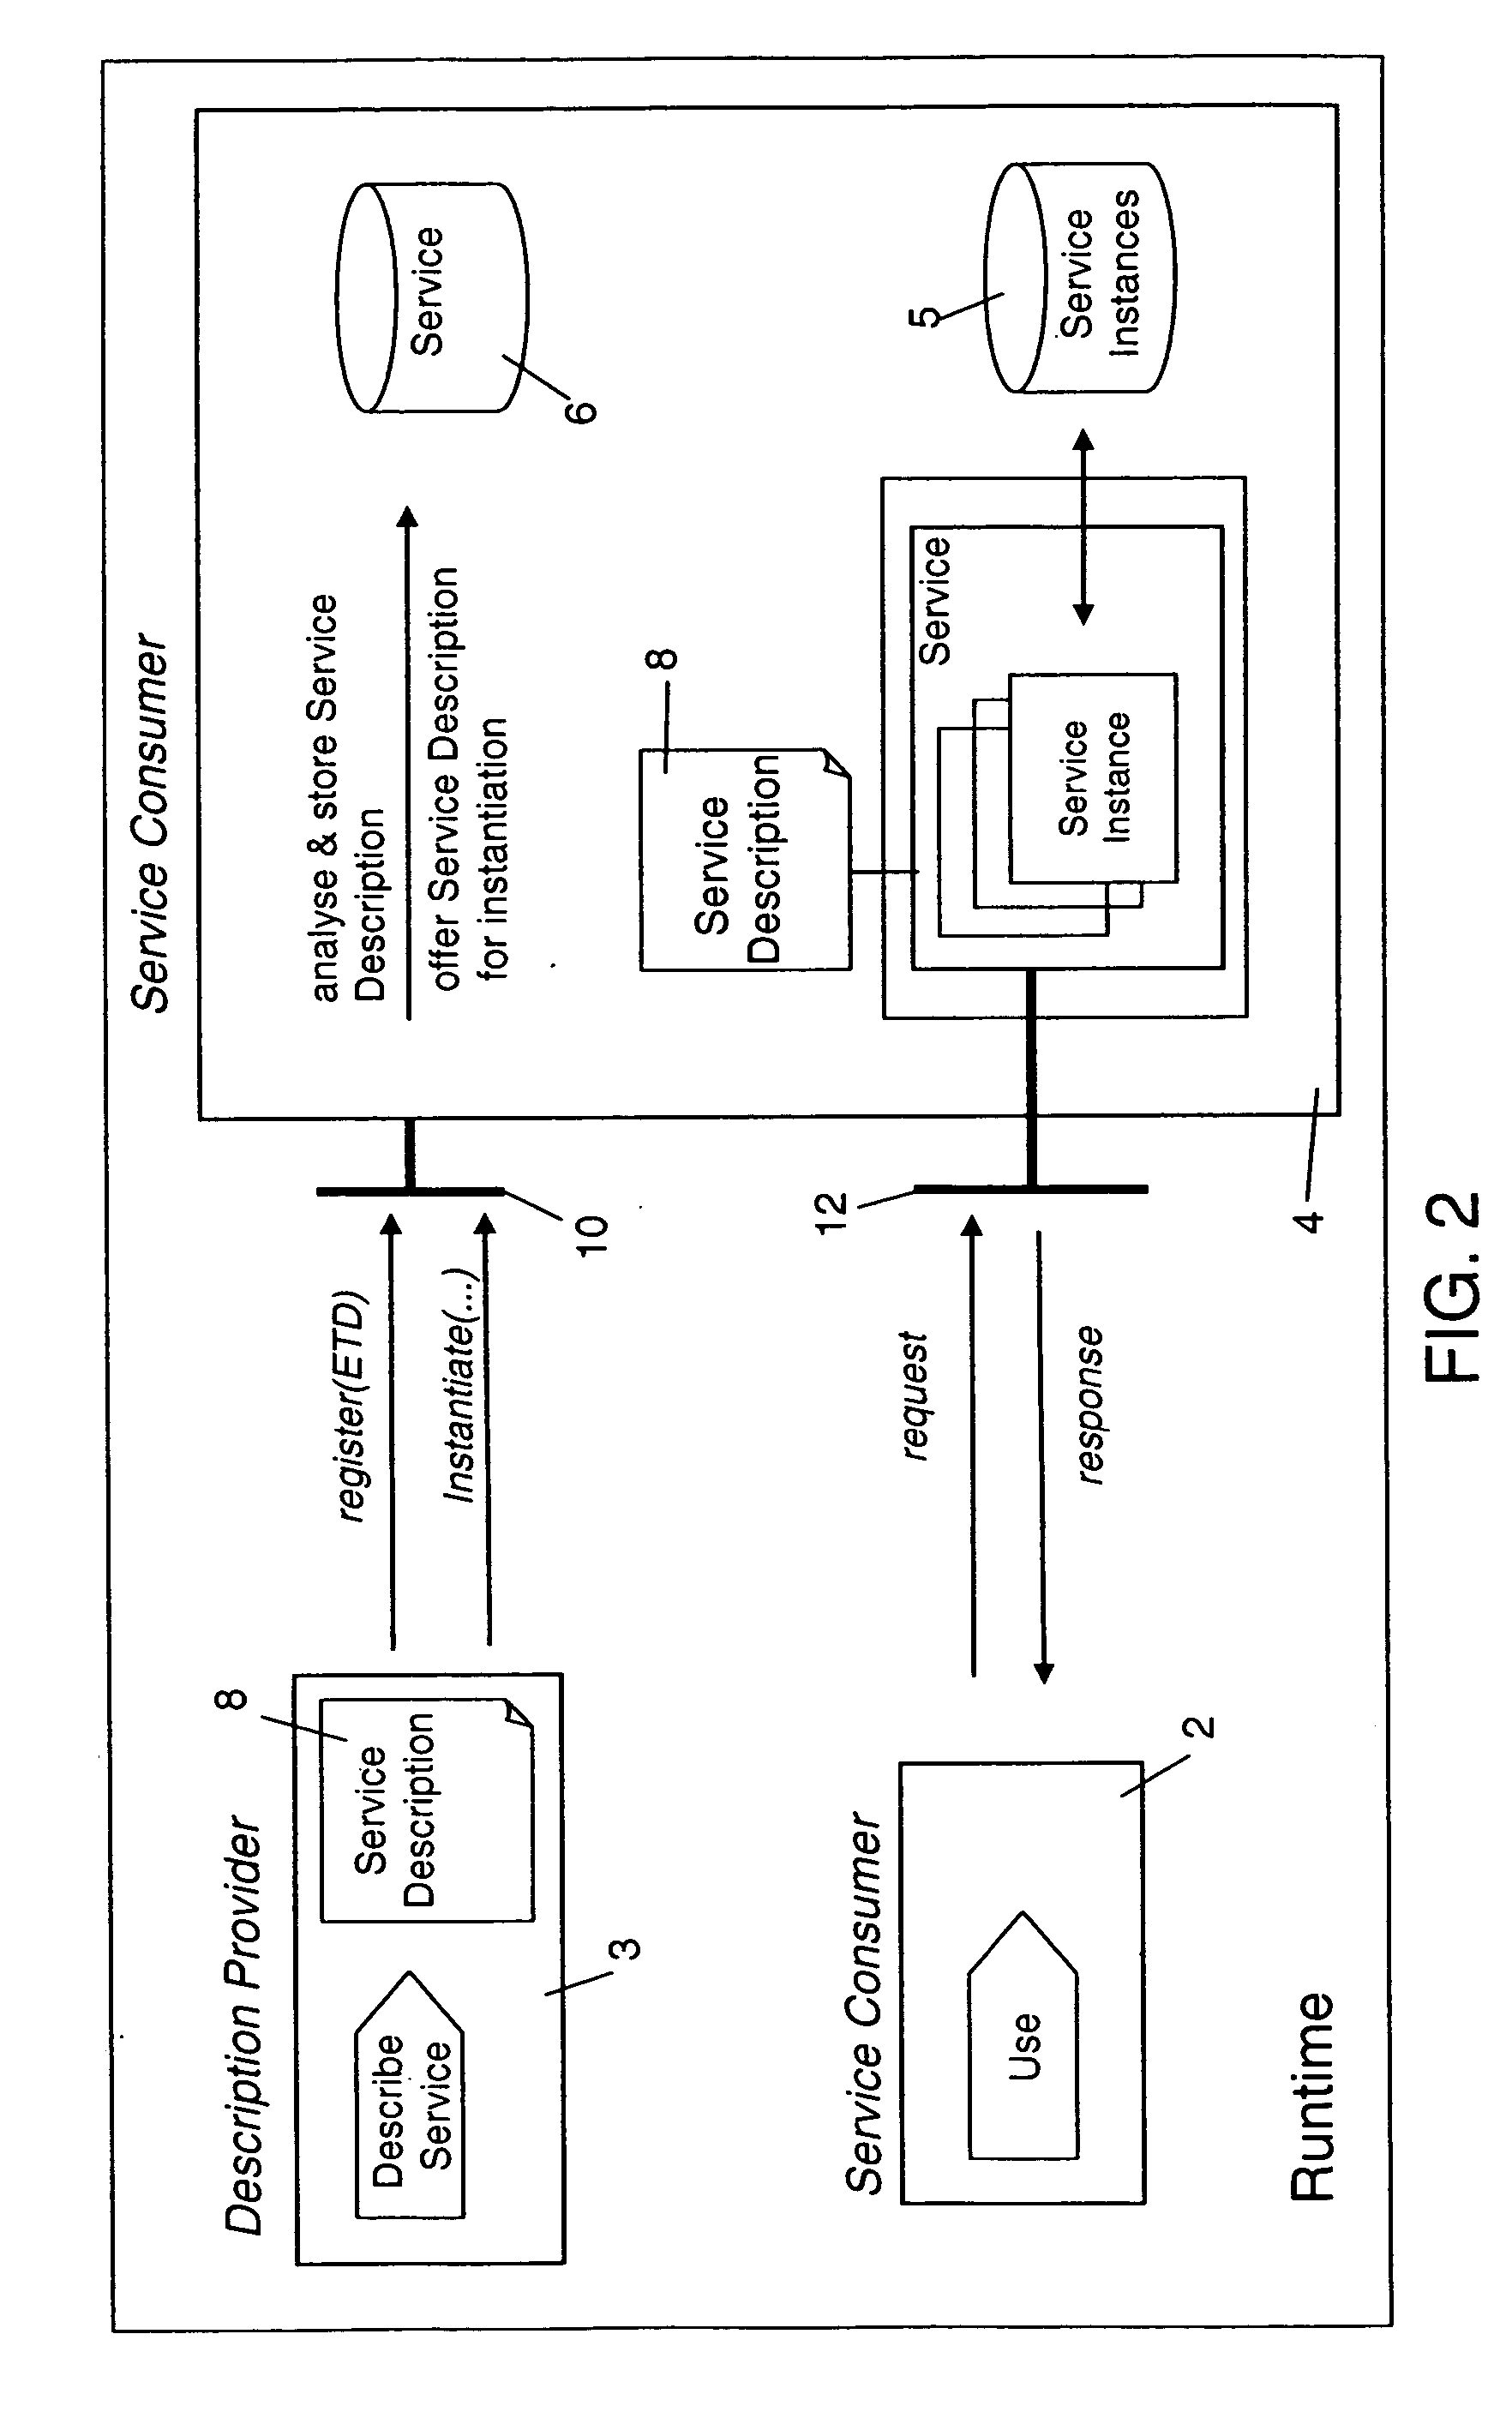 System and method for modeling and dynamically deploying services into a distributed networking architecture